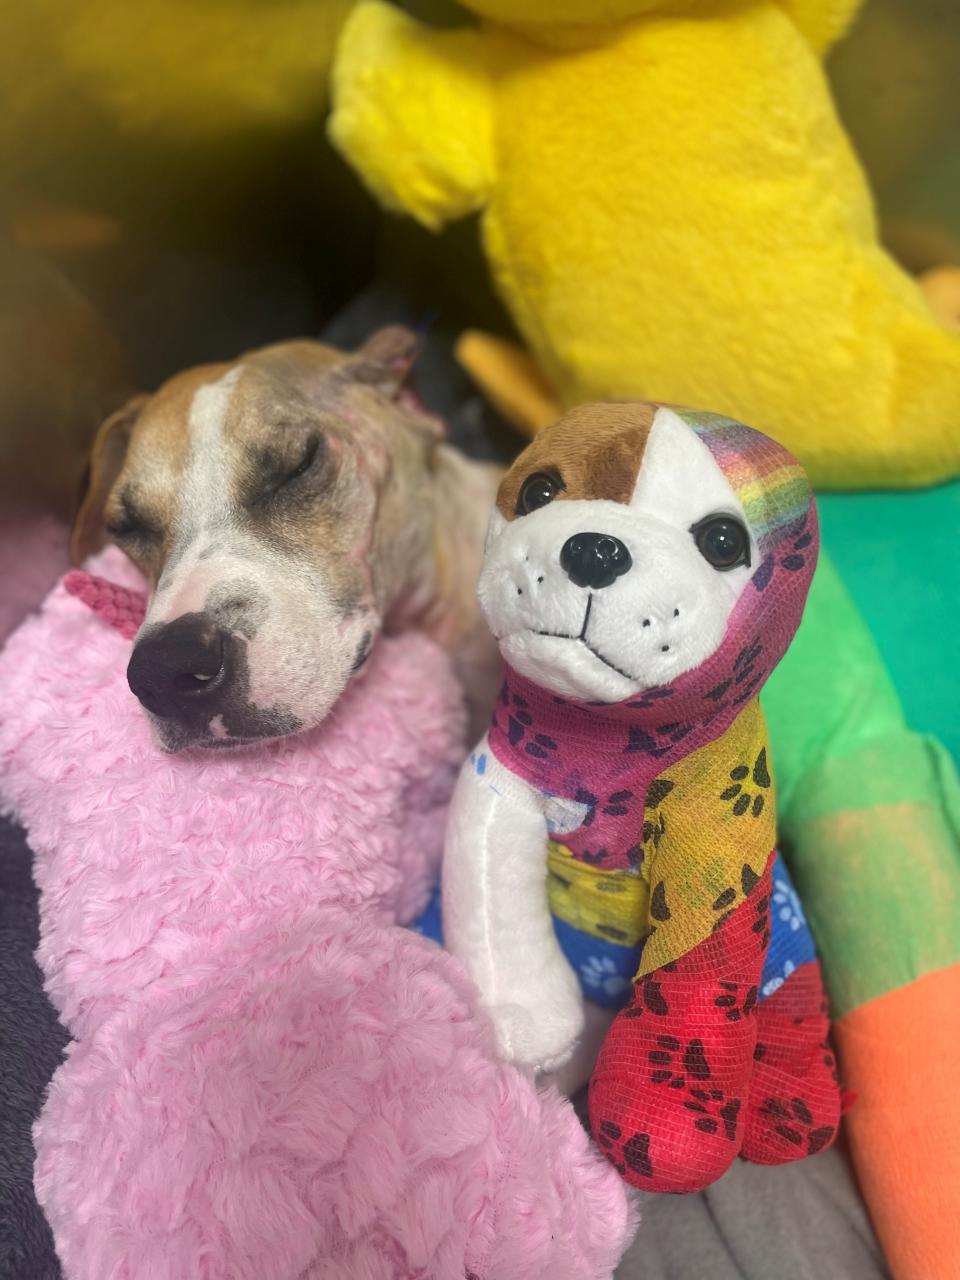 Riona snuggled with her look-a-like while recovering from surgery.